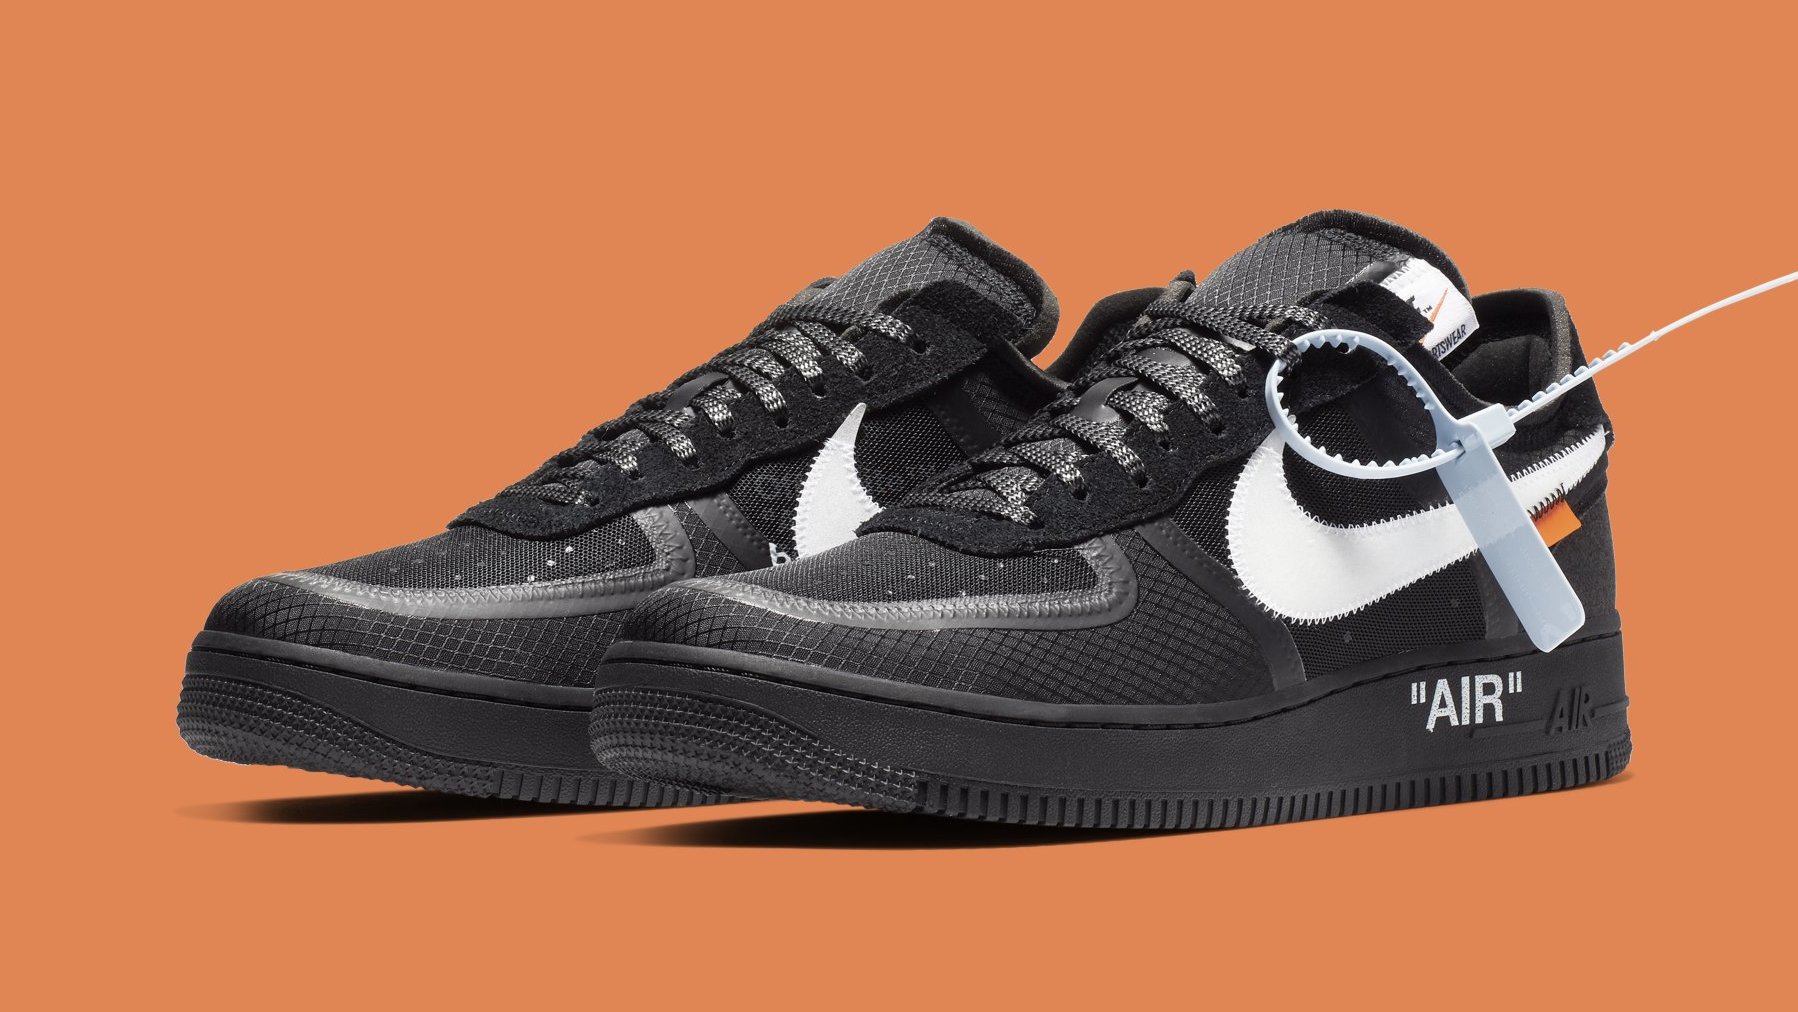 Off-White x Nike Air Force 1 Low 'Black/White' AO4606-001 Date Sole Collector